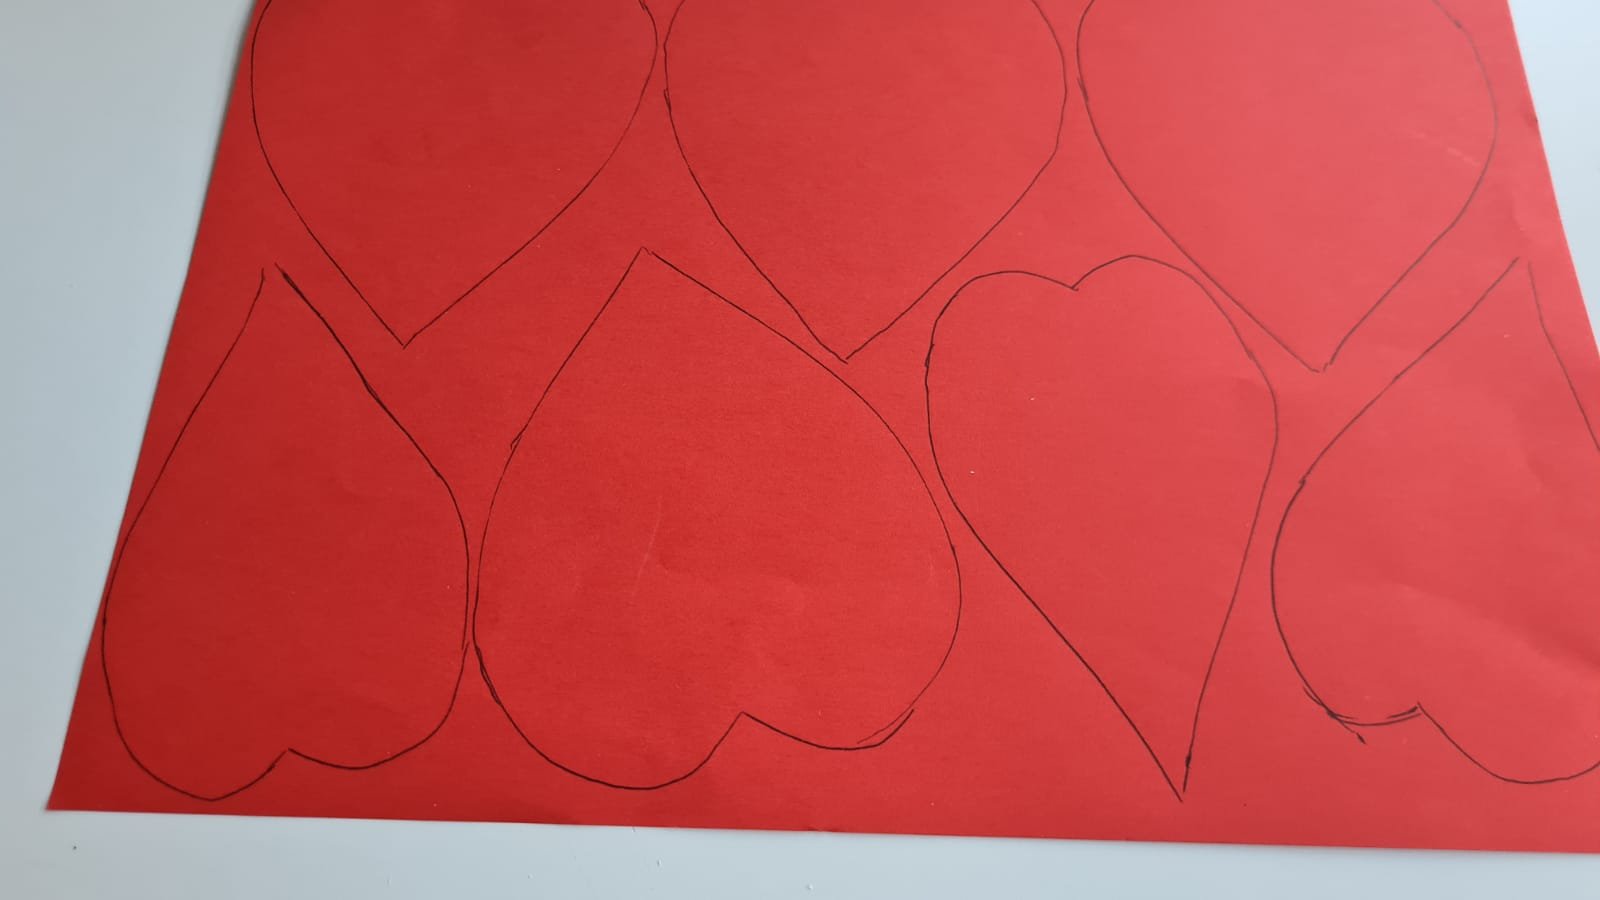 Hearts drawn on a red piece of paper